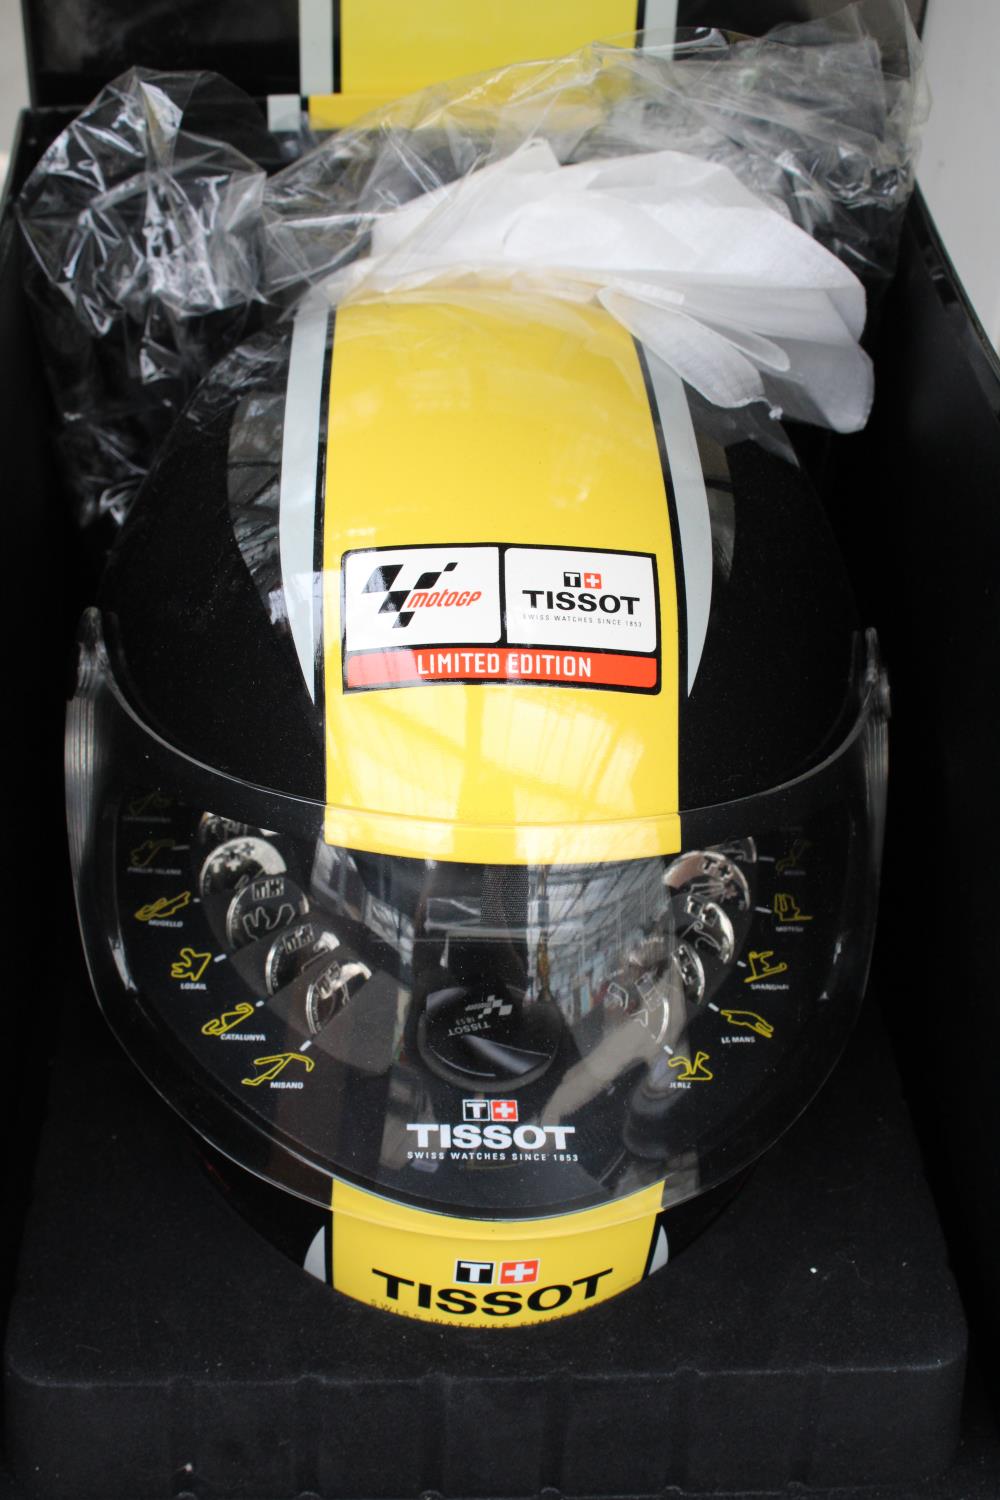 A TISSOT 2008 LIMITED EDITION MOTORBIKE HELMET WATCH BOX WITH A FULL SET OF INTERCHANGABLE WATCH - Image 2 of 5